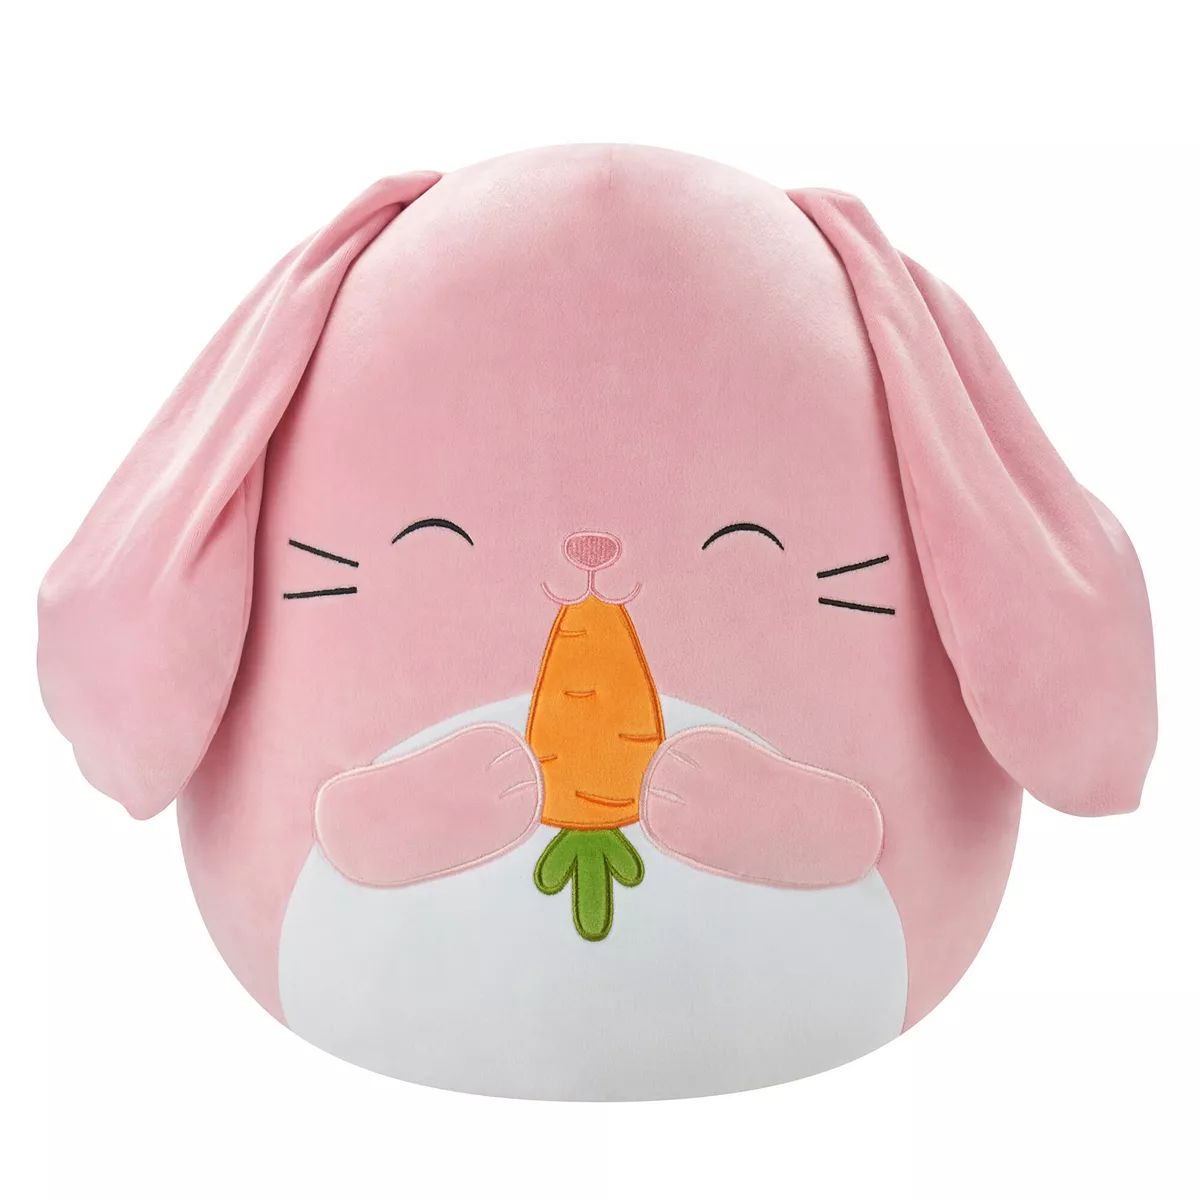 Squishmallows 12-in. Squish Bop Pink Bunny Nibbling Carrot | Kohl's